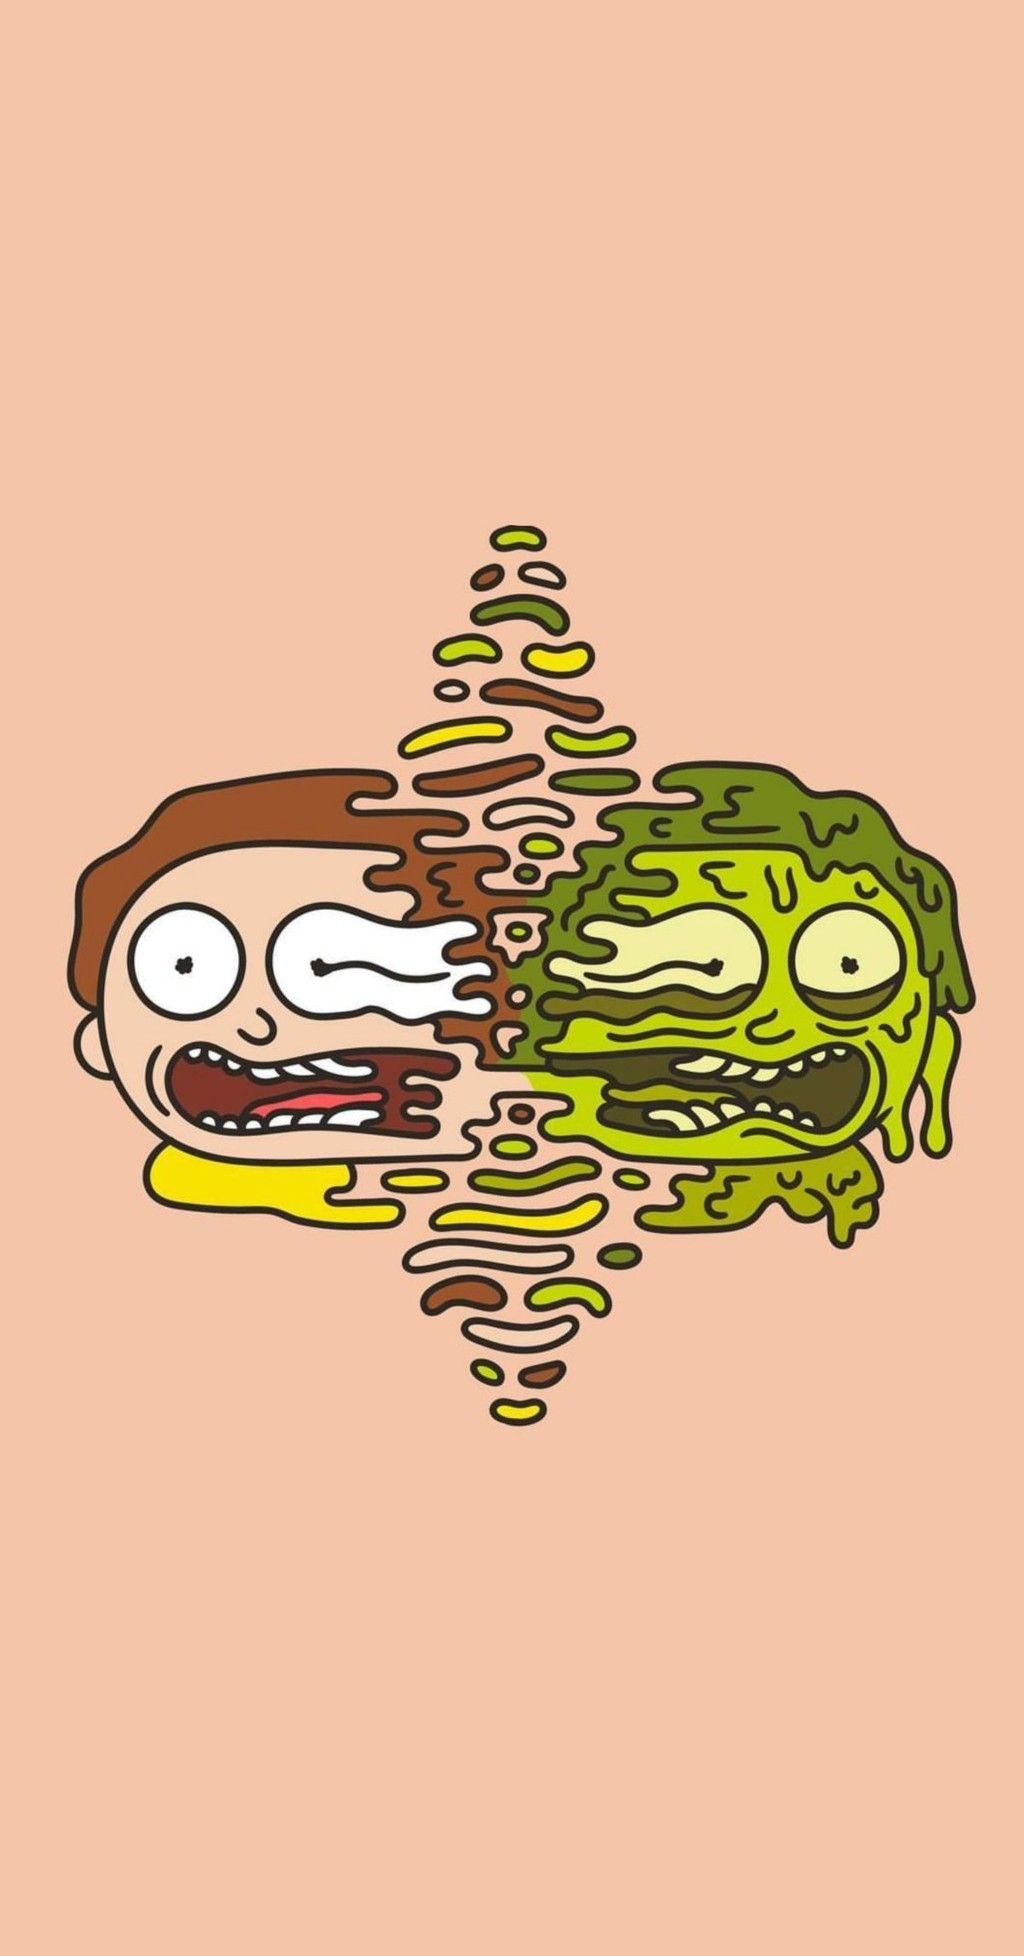 Toxic Morty. Rick and morty poster, Rick and morty stickers, Rick and morty characters